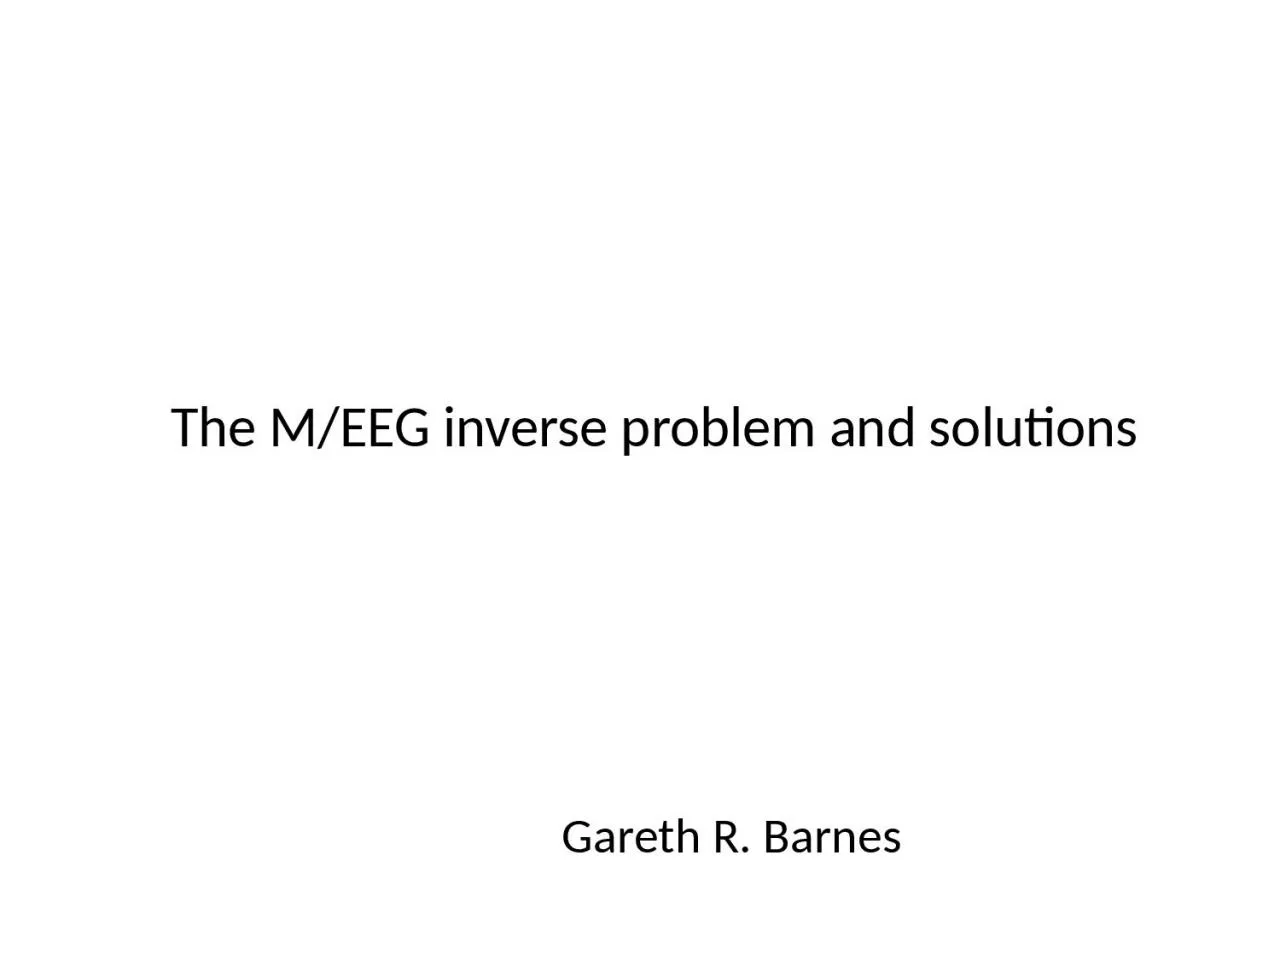 The M/EEG inverse problem and solutions